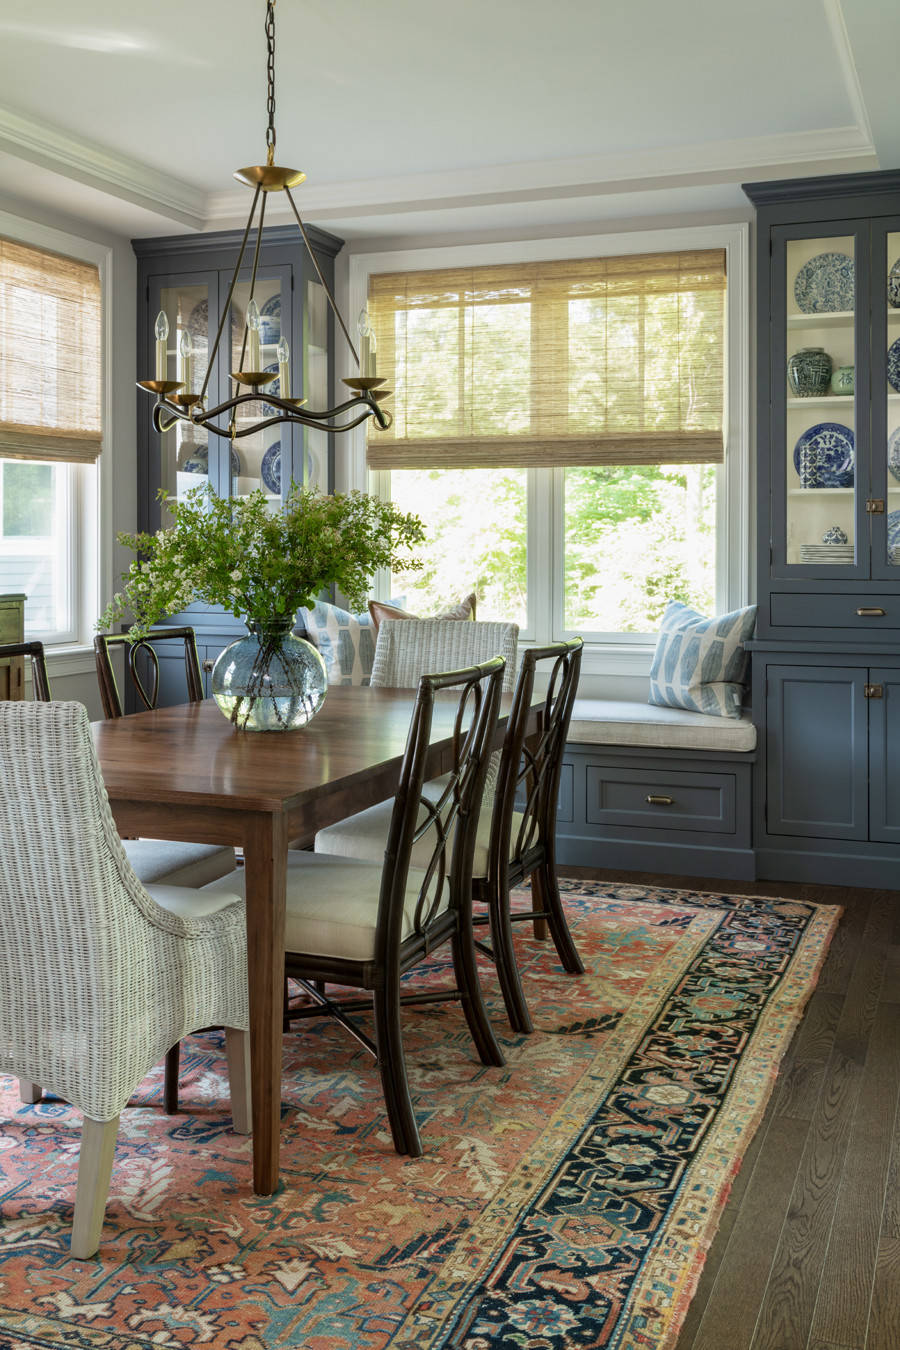 20 Traditional Dining Room Ideas You'll Love   July, 20   Houzz